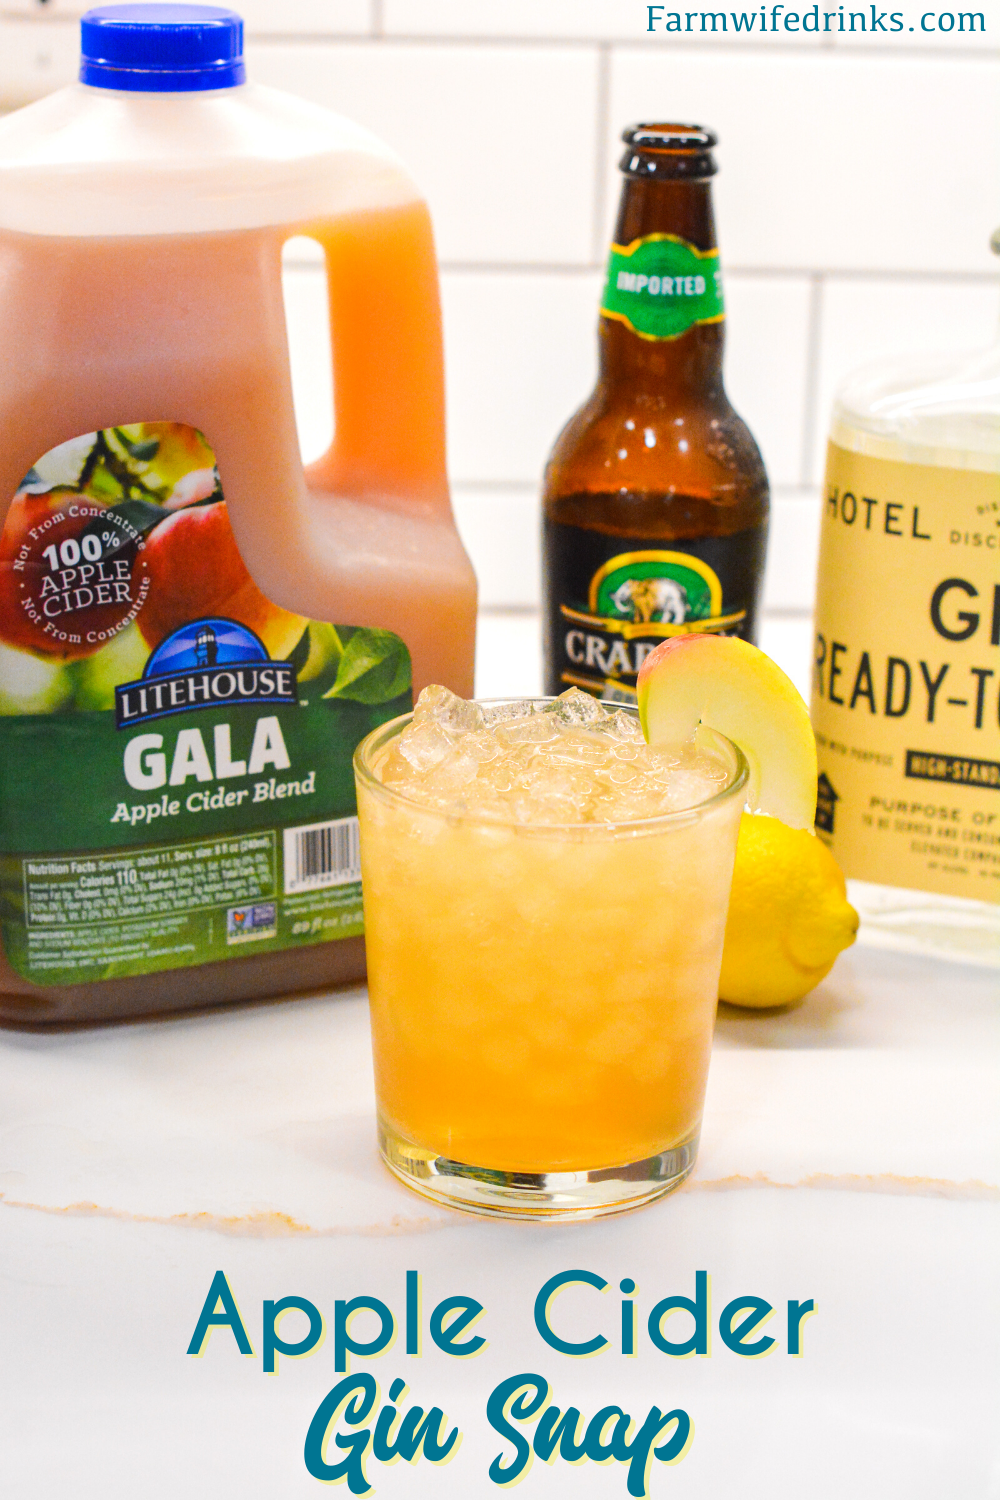 Apple cider gin snap is a gin variation to the a Moscow mule with the combination of ginger beer, apple cider, gin, and lemon juice to create a ginger apple cider gin cocktail.